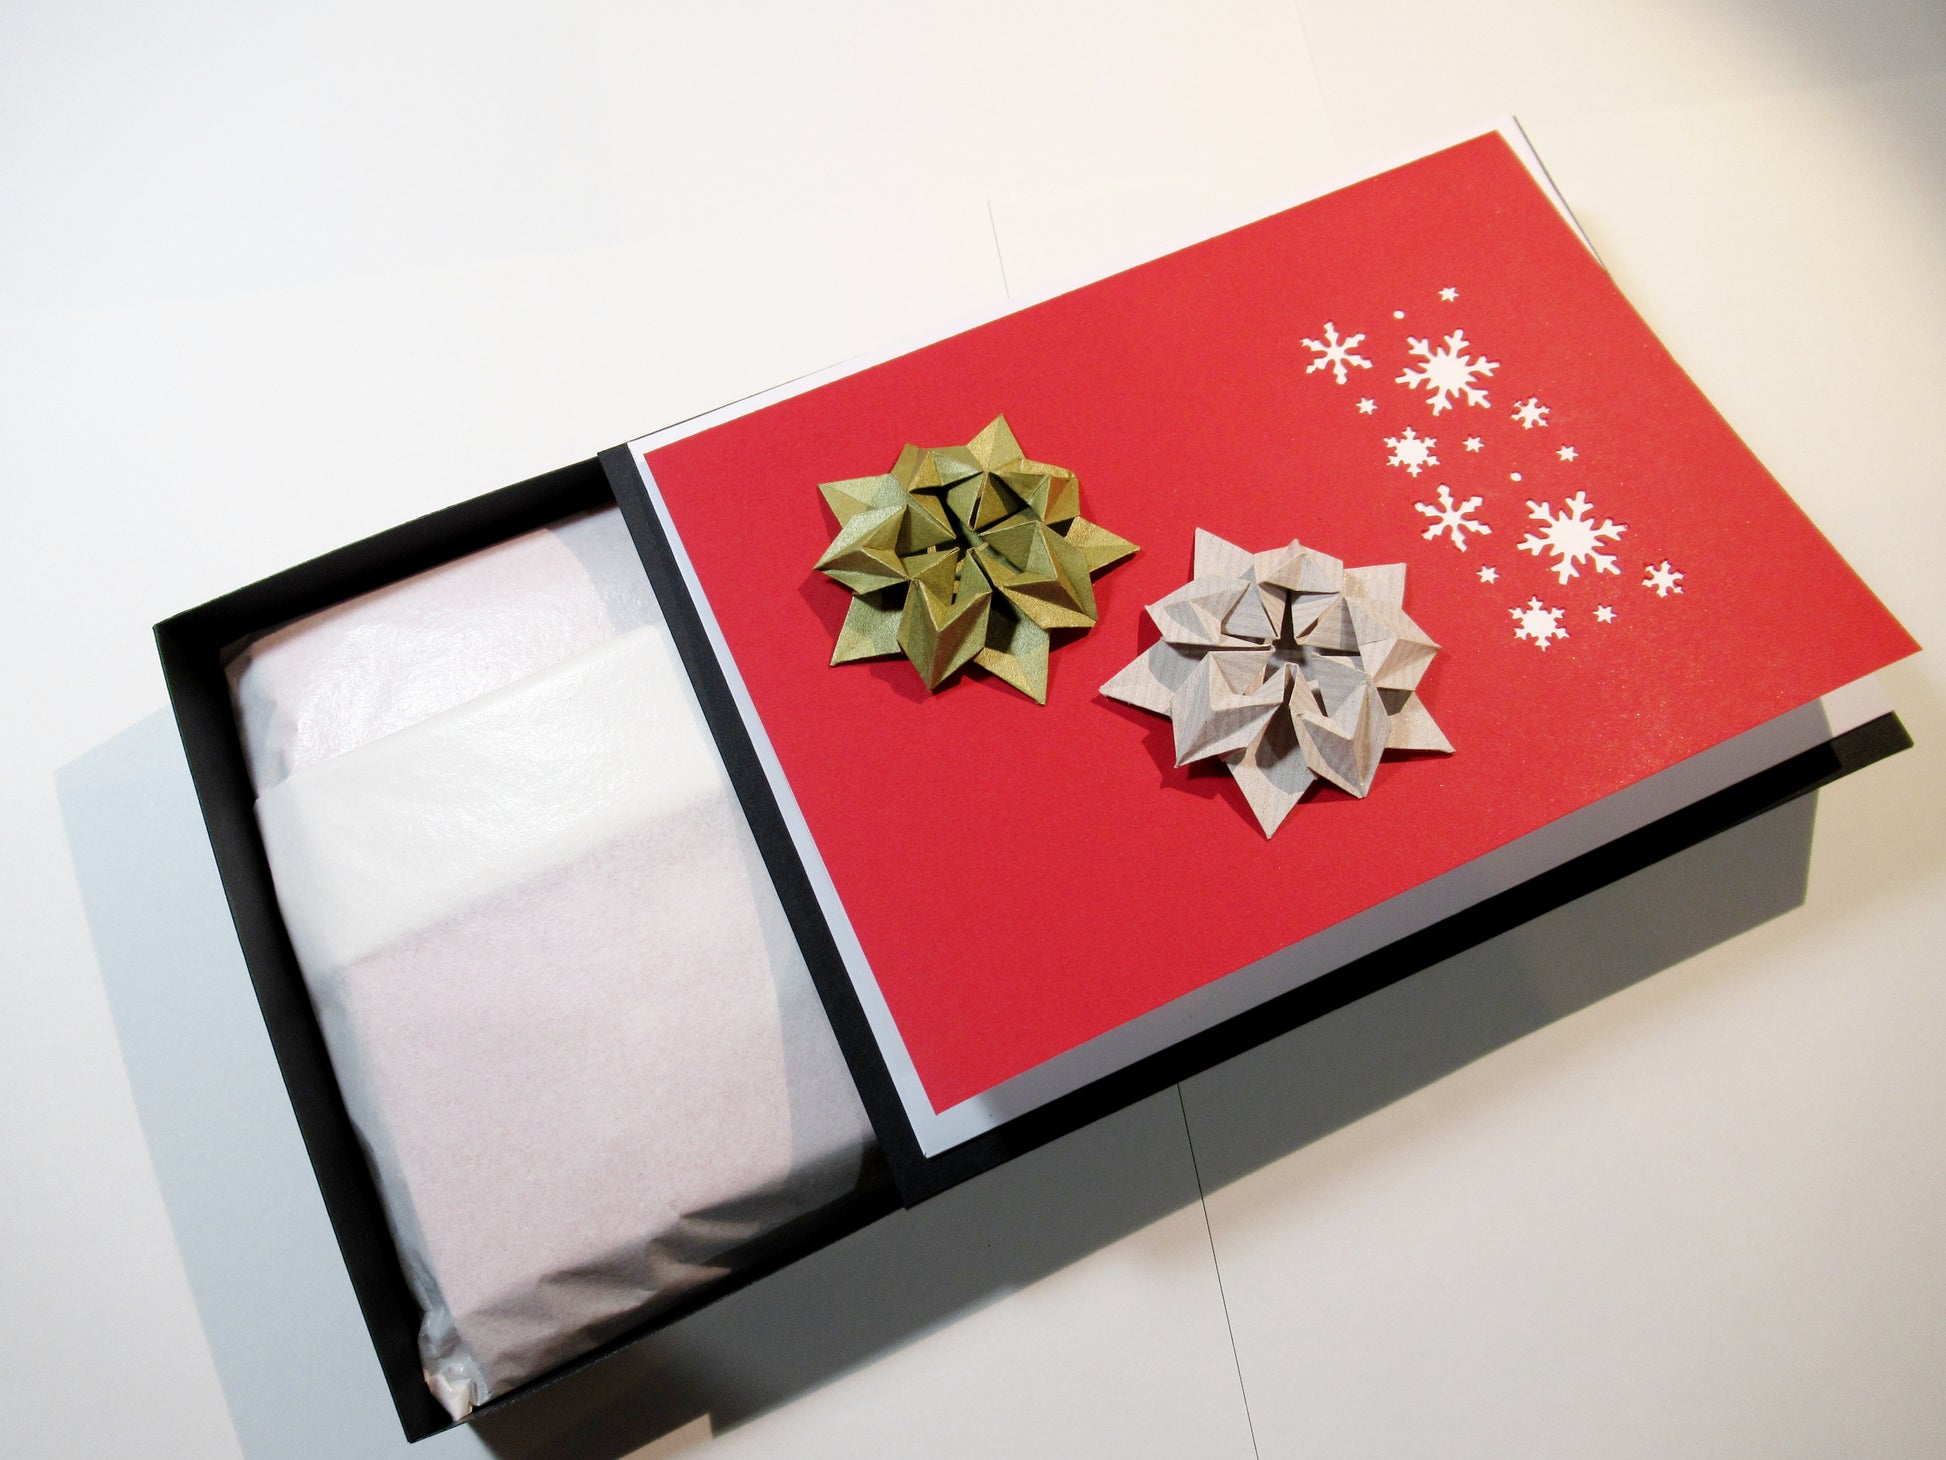 An open black box showing tissue paper wrapped inside. The outside has a red and white card with origami stars and snowflakes resting on top.